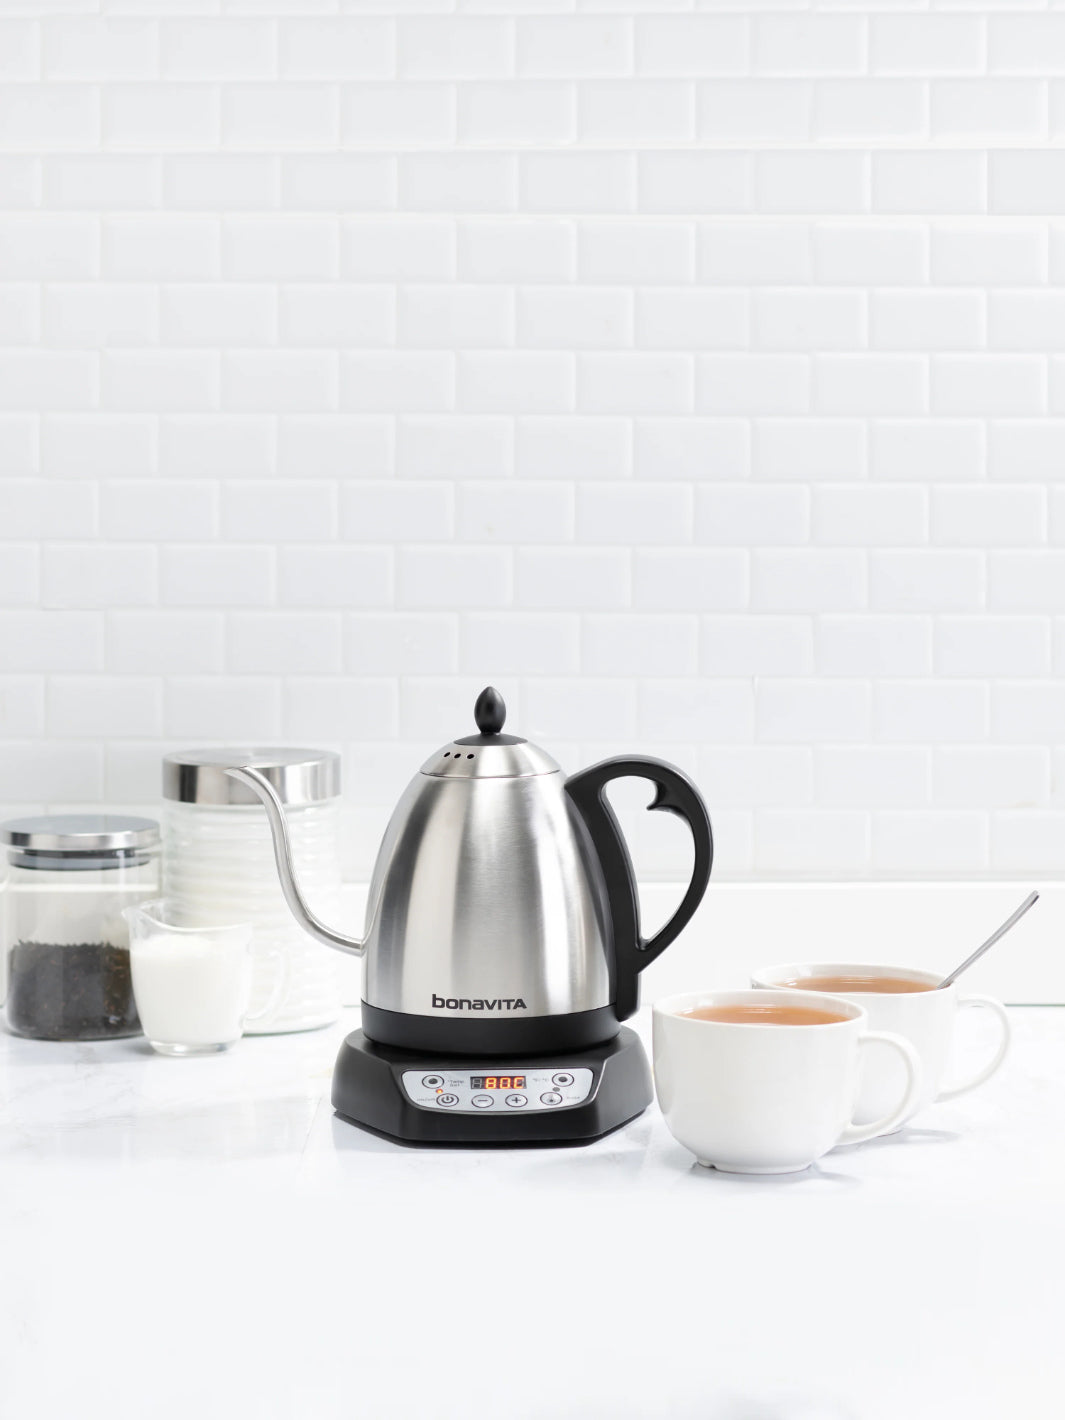 Great electric gooseneck kettle for under $100 : r/pourover